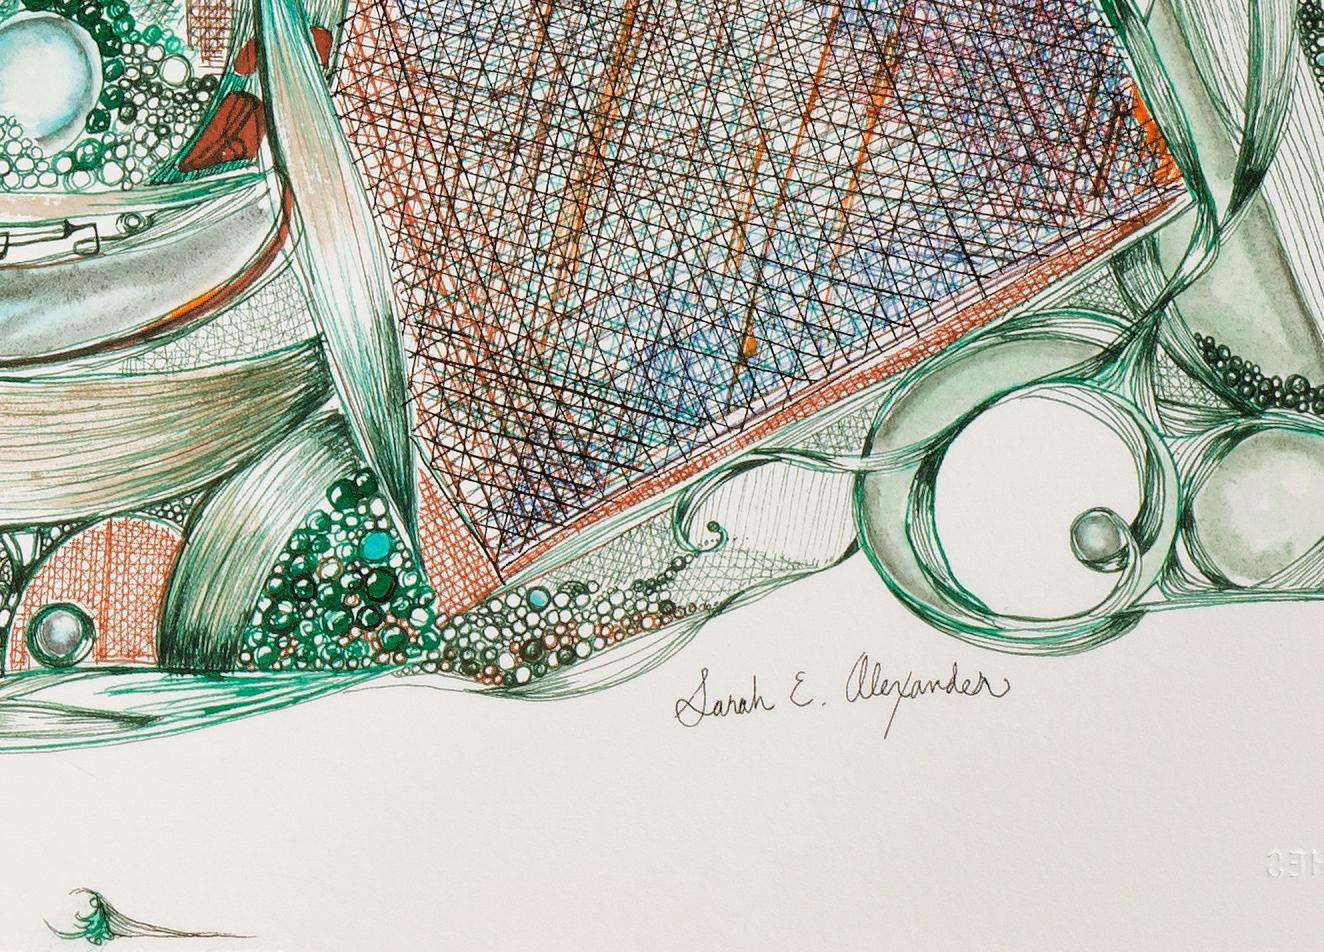 In Sarah Alexander's contemporary drawing on watercolor paper 